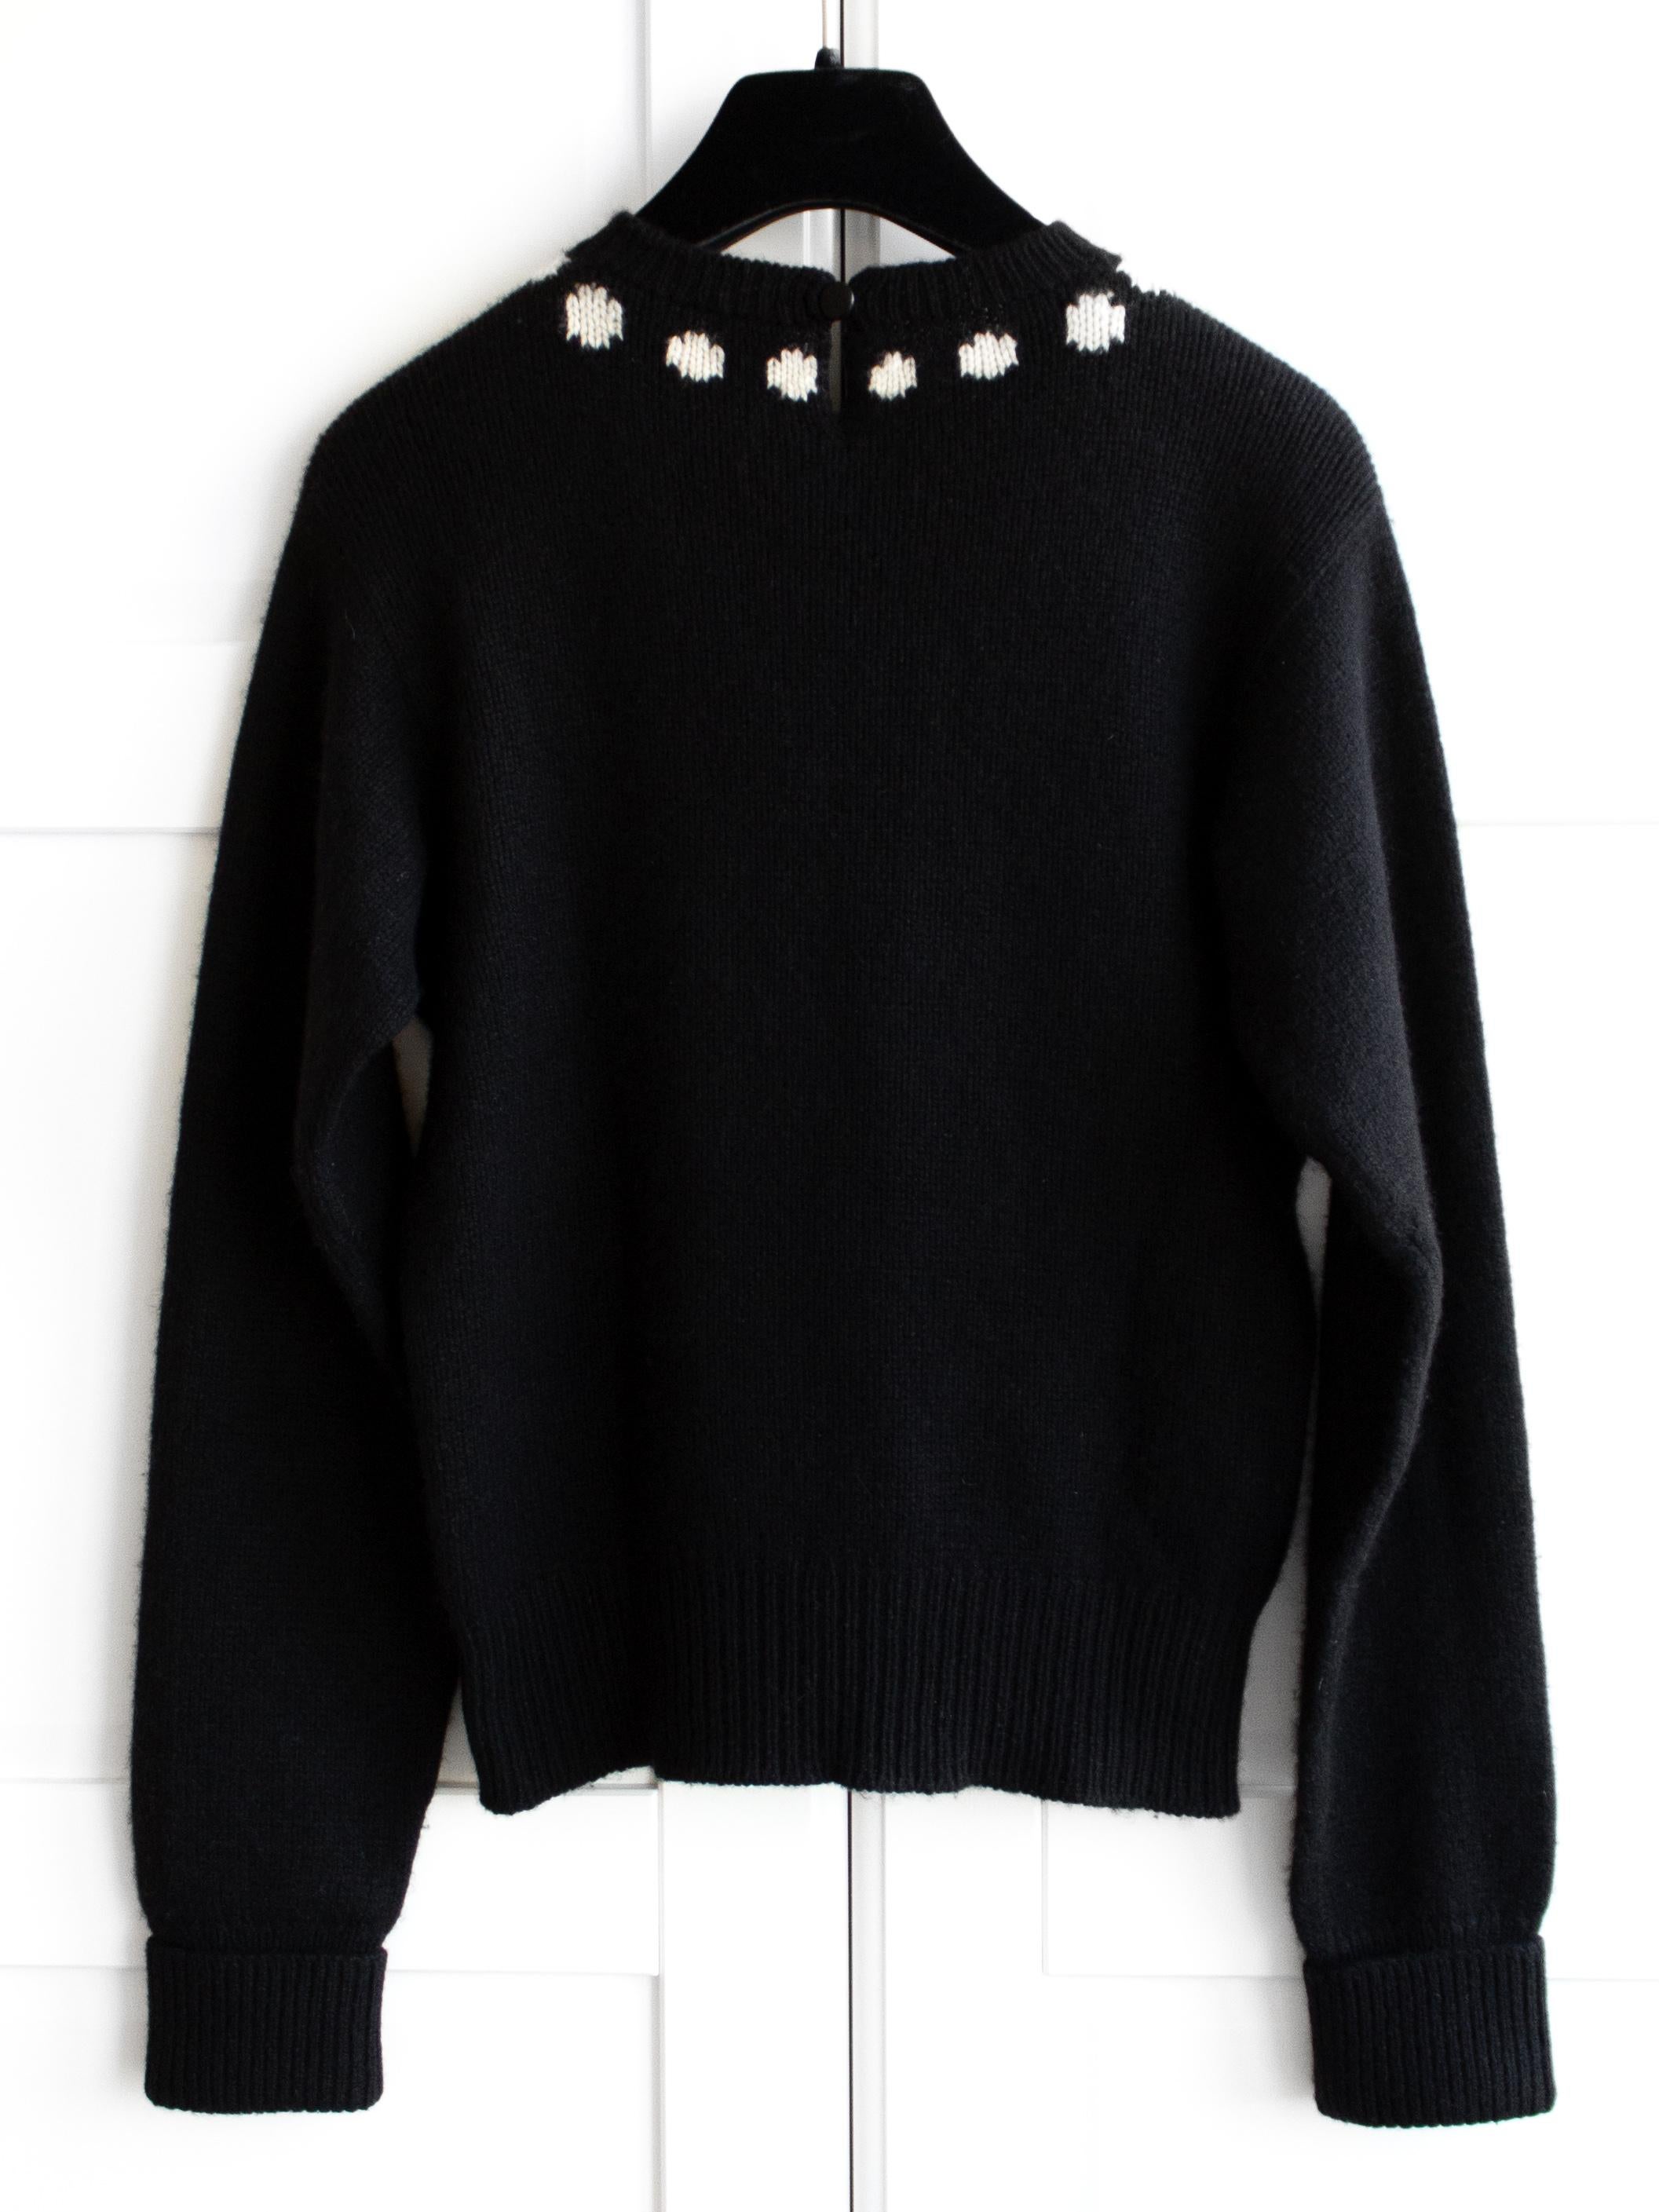 Rare black sweater from Chanel Fall 1995 collection. Knitted from soft black cashmere, this Chanel jumper is adorned with an intarsia knit resembling a white pearl necklace with a multicolor gripoix pendant. Very good condition for its age, no